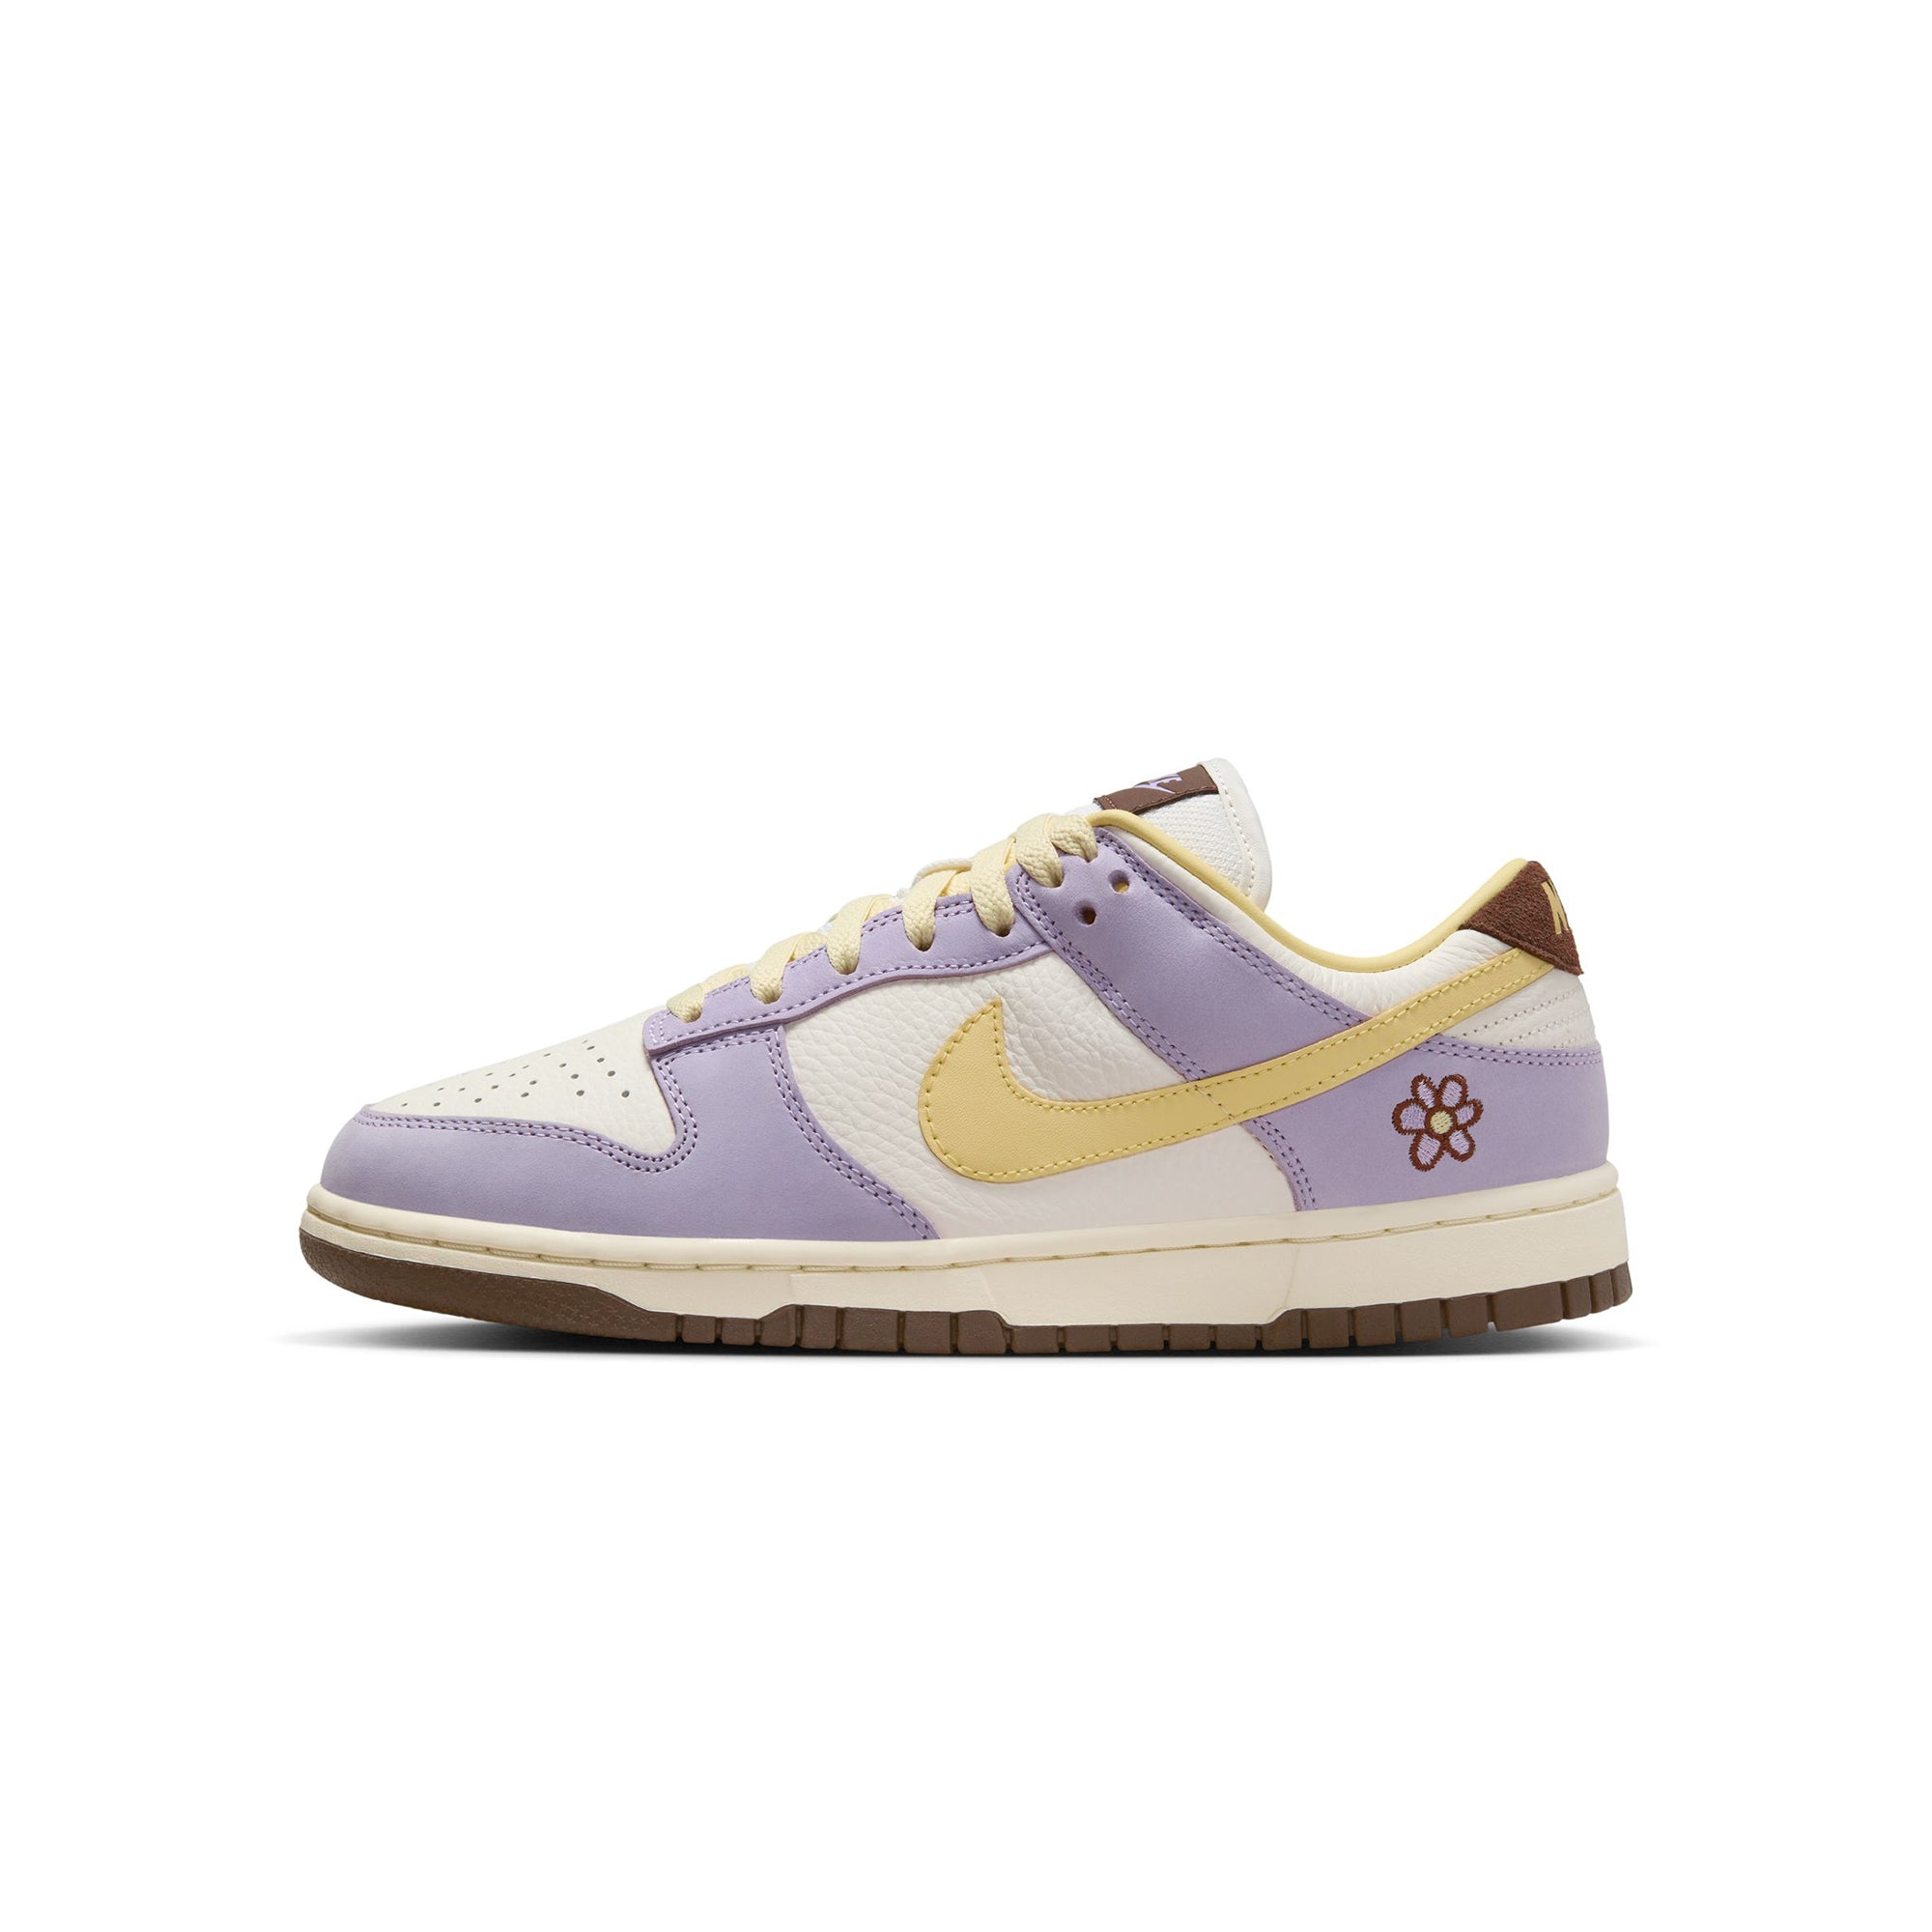 Nike Womens Dunk Low Premium "Lilac Bloom" Shoes card image